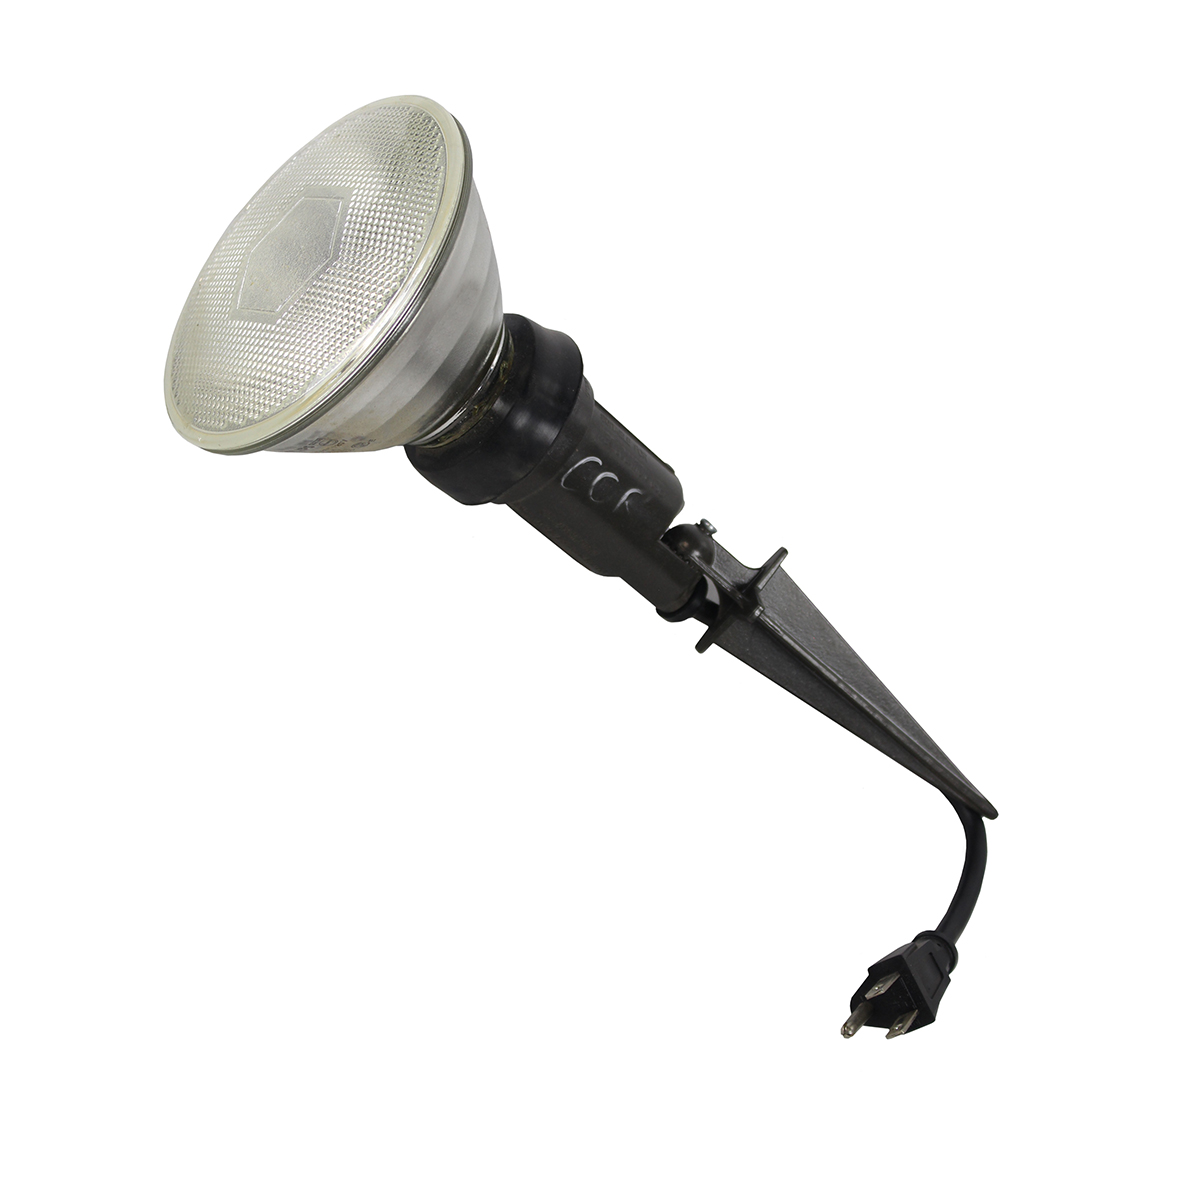 Staked Flood Light